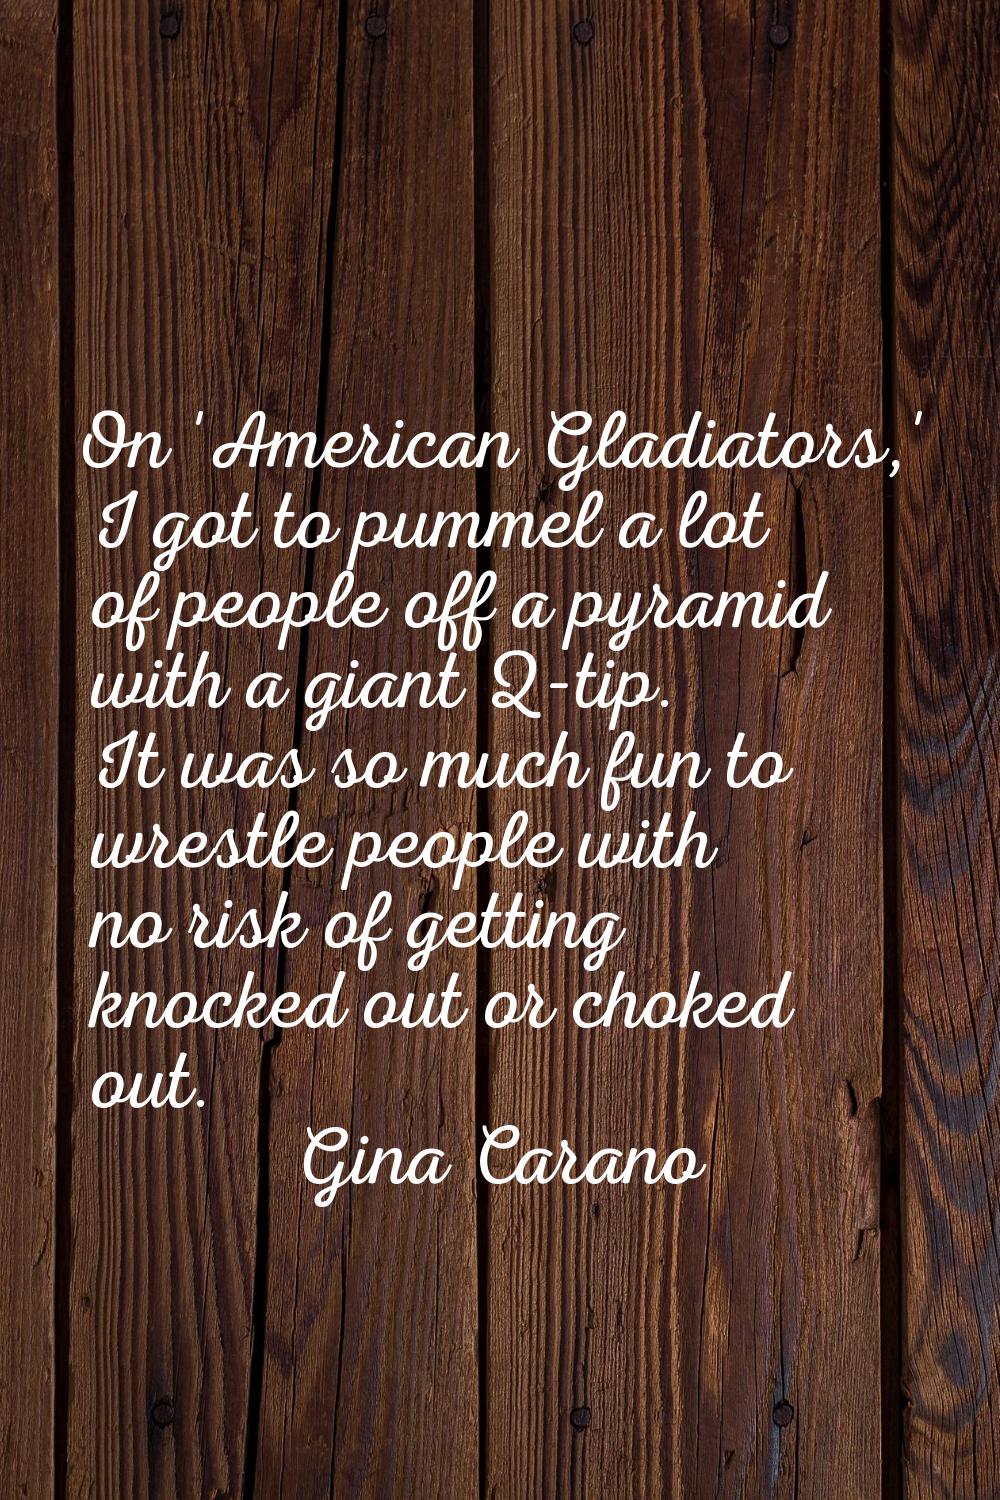 On 'American Gladiators,' I got to pummel a lot of people off a pyramid with a giant Q-tip. It was 